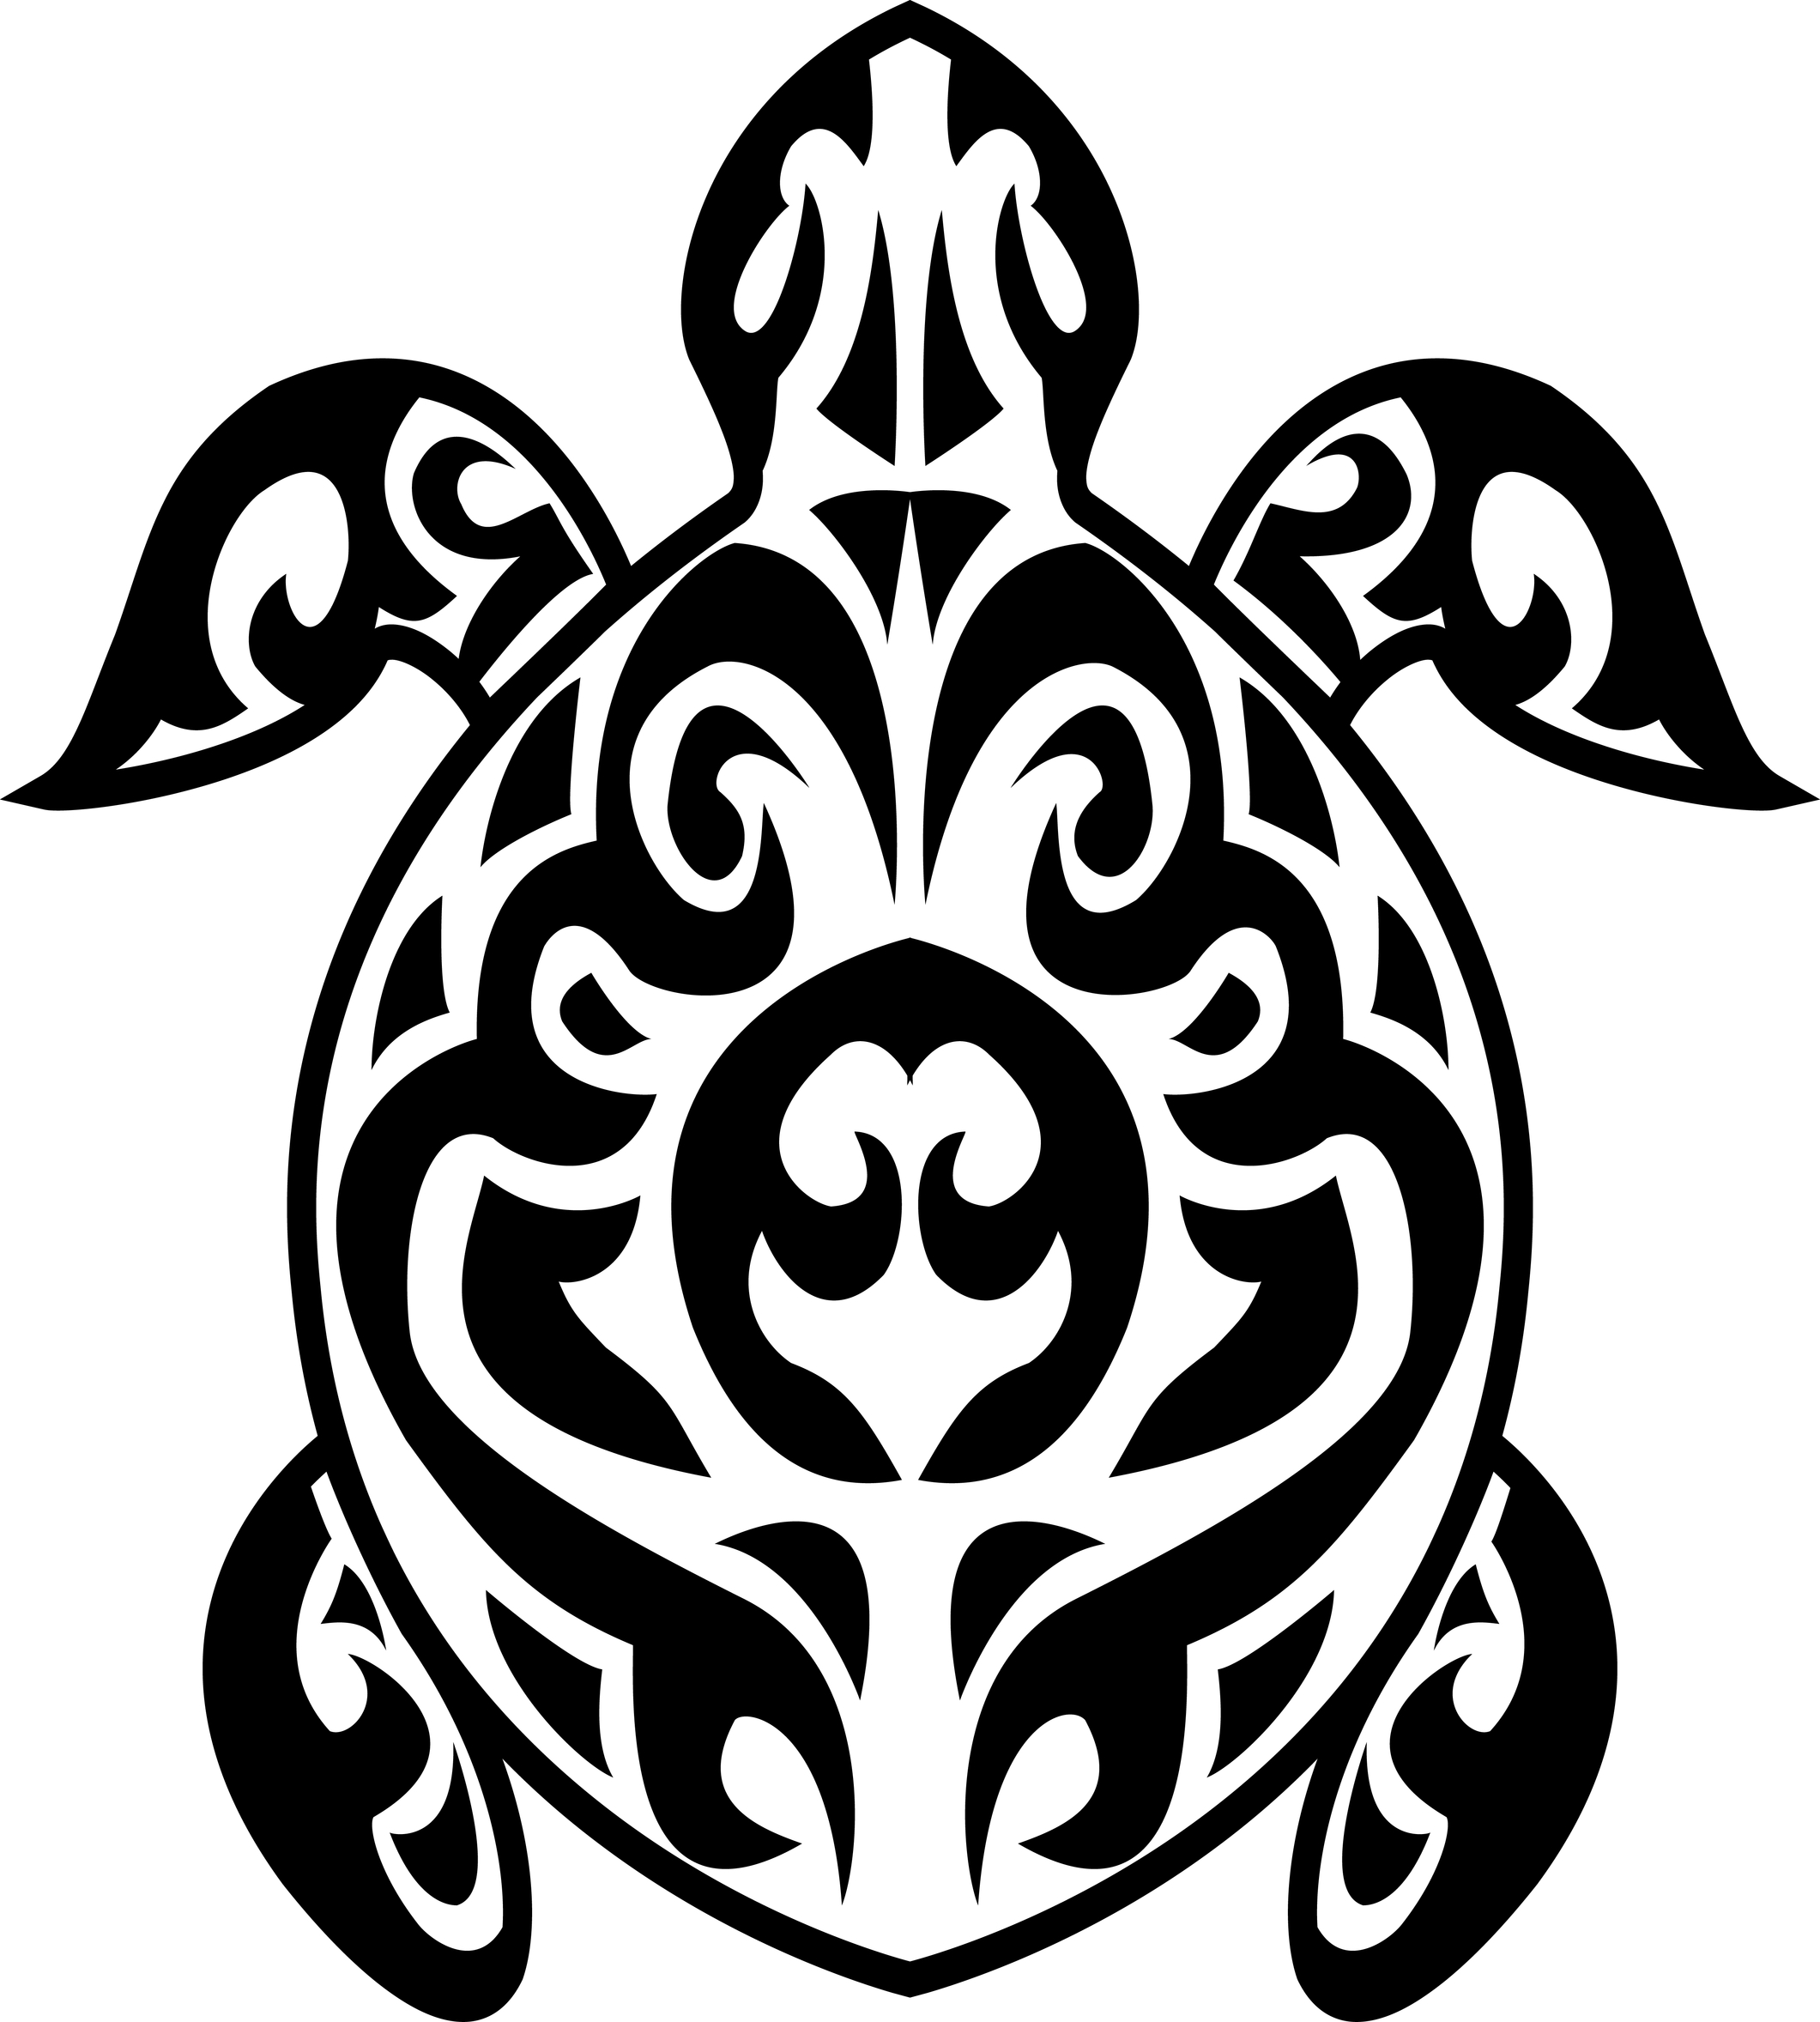 Turtle tribal designs | Clipart Panda - Free Clipart Images